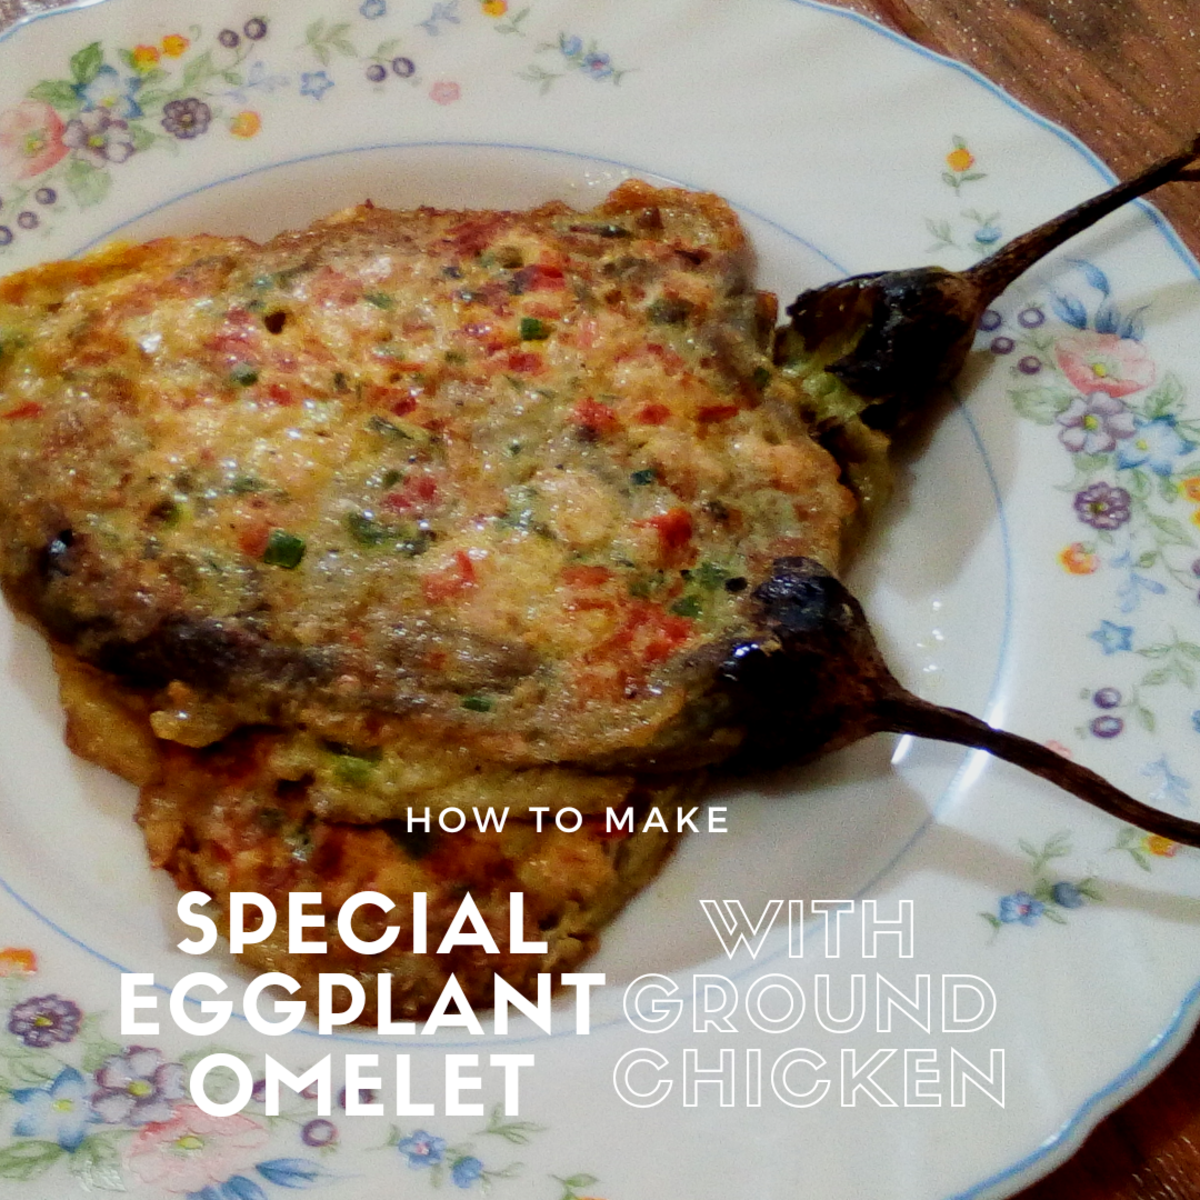 How to Cook a Special Eggplant Omelet With Ground Chicken